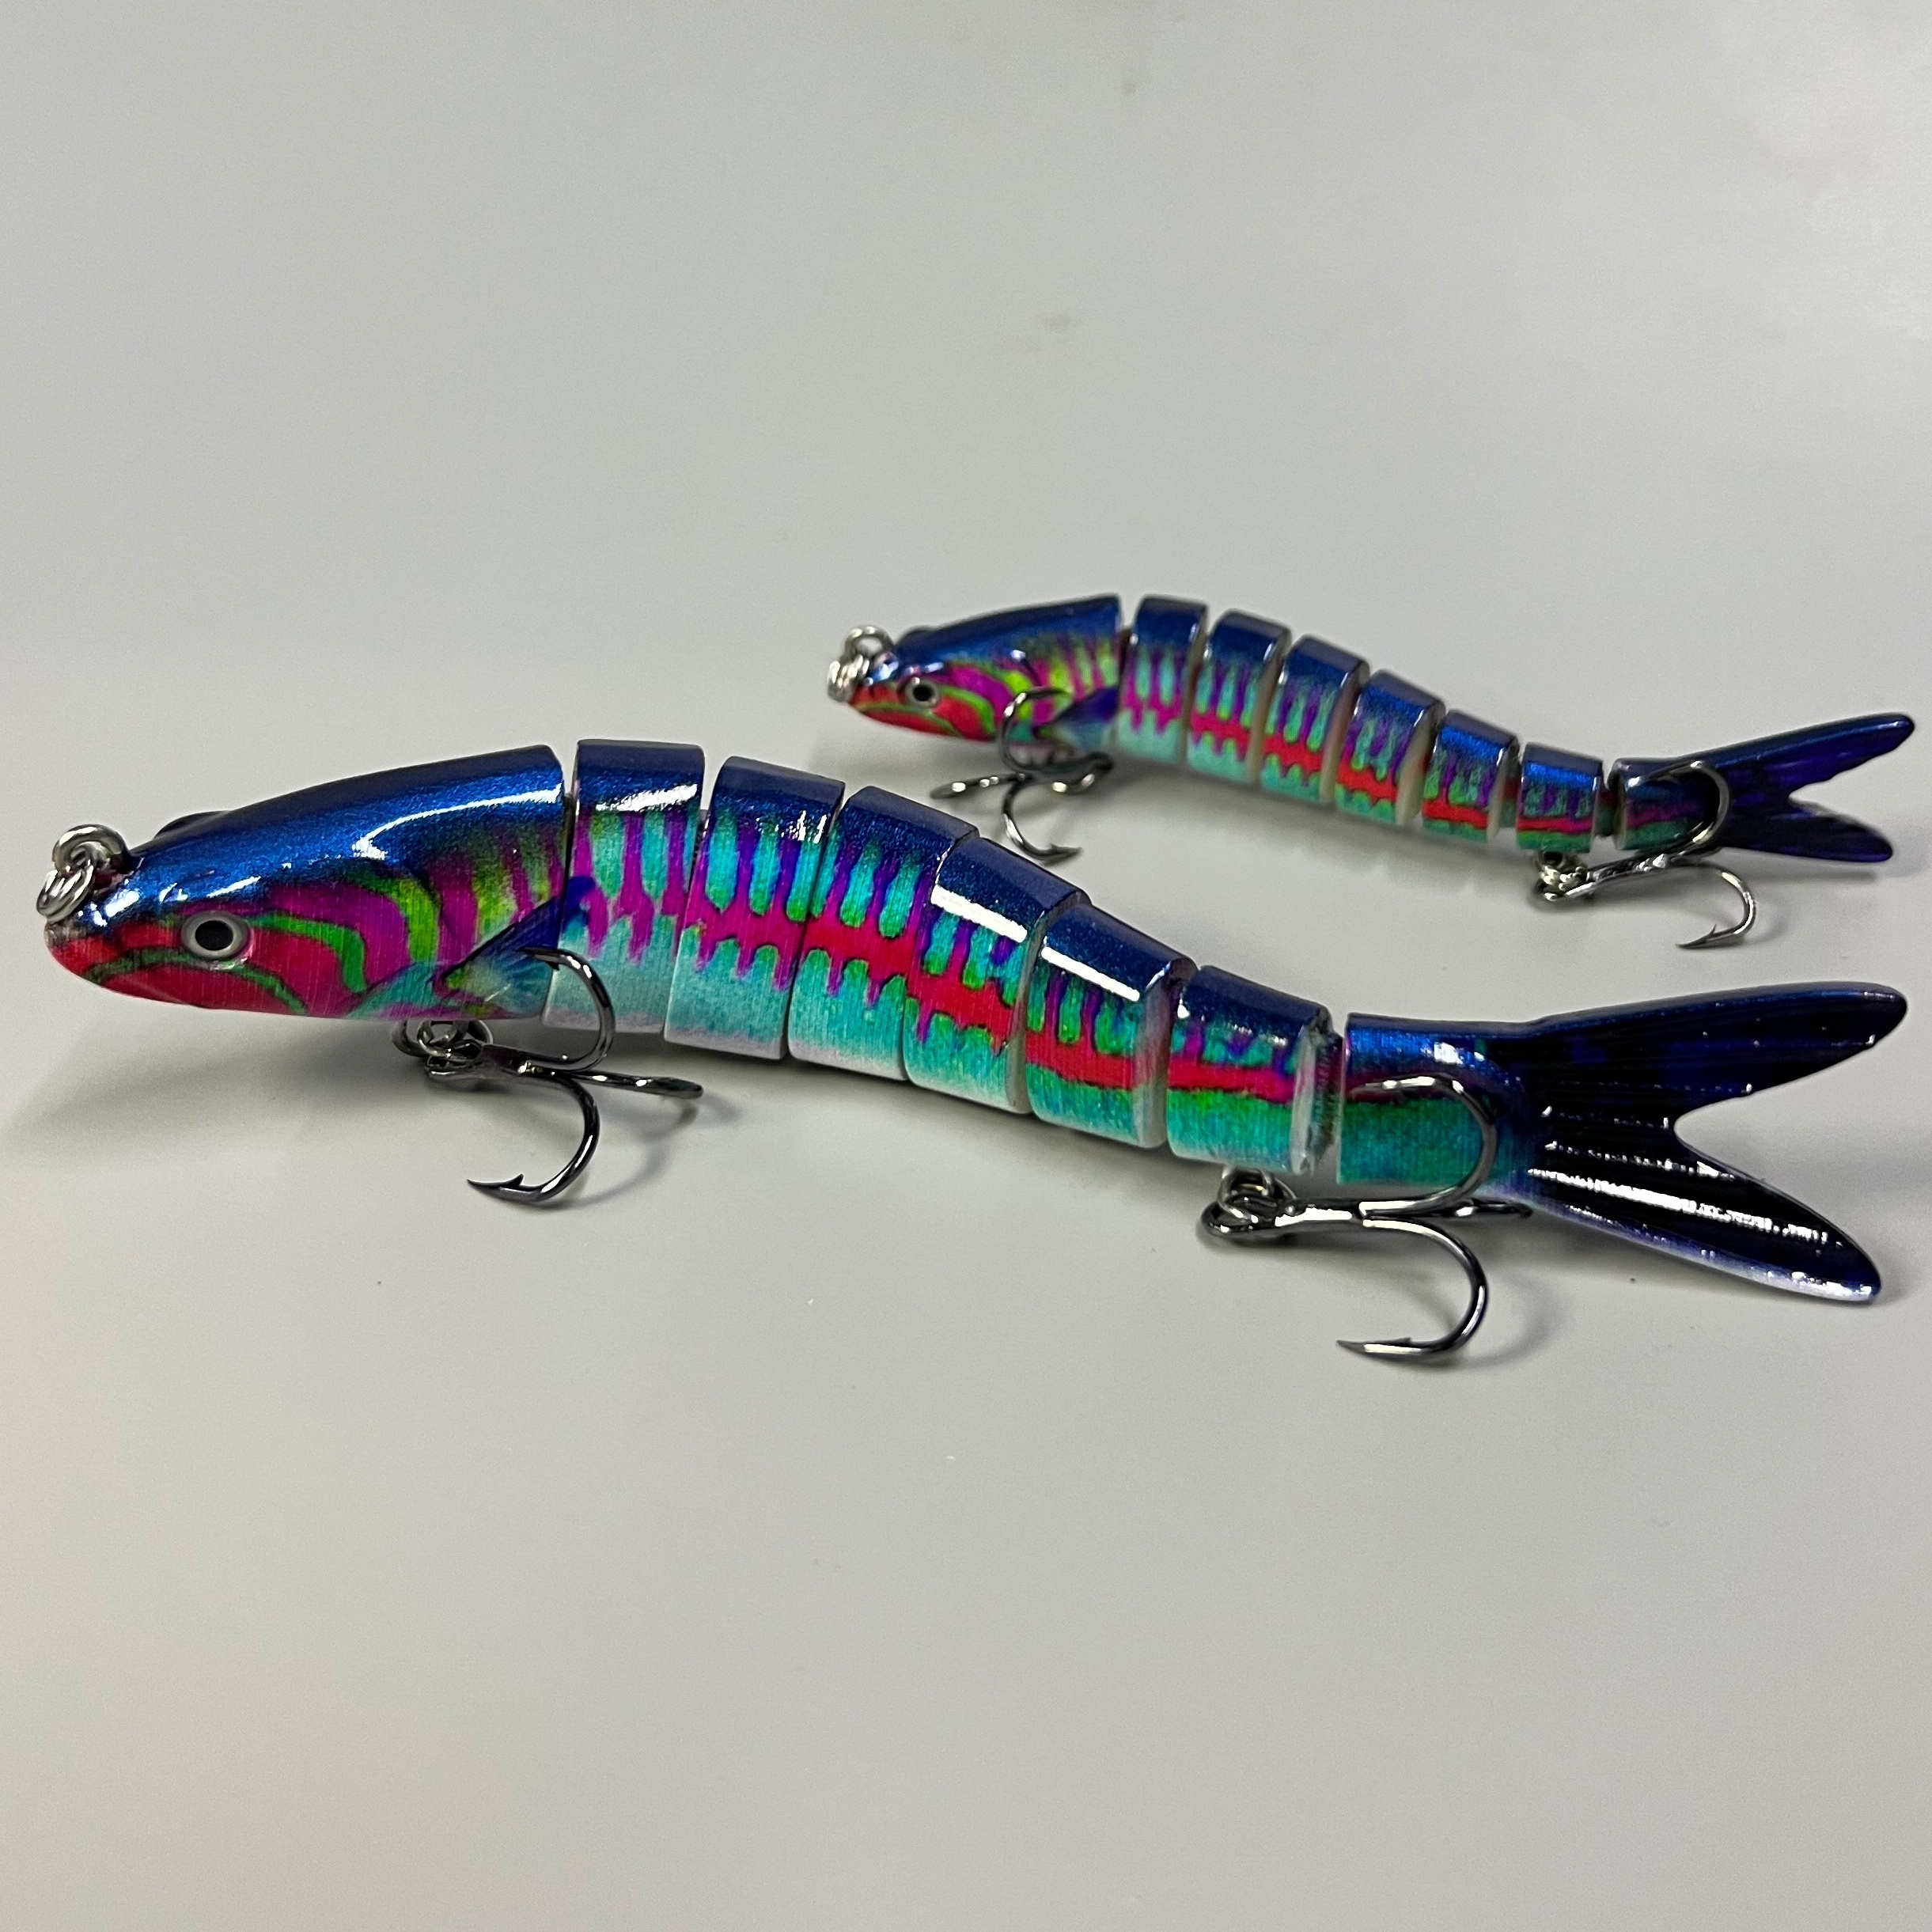 ENHANCE THE ATTRACTIVENESS of Your Lures with 18pcs Reflective